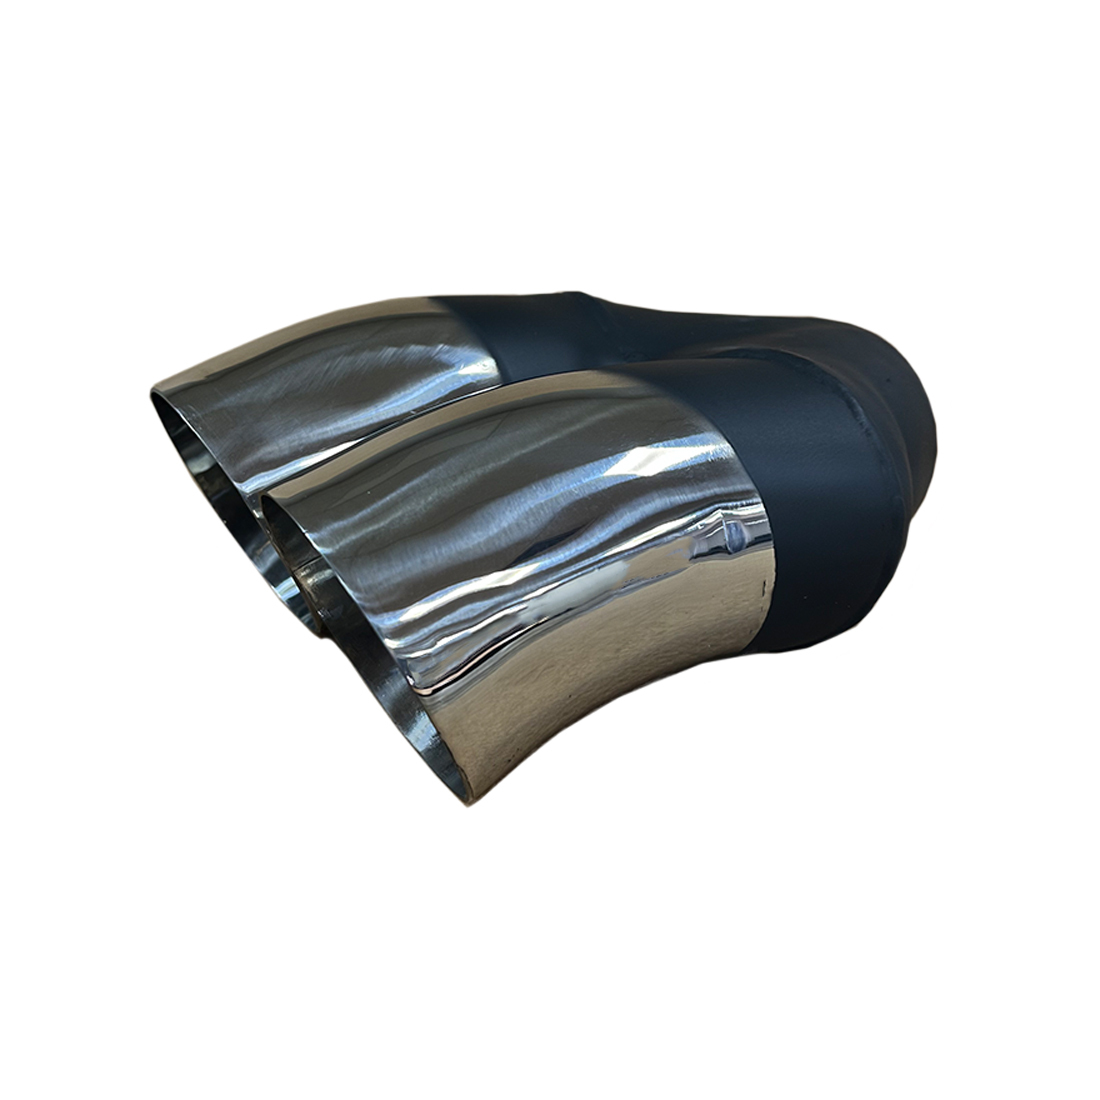 Dump Cut Tip Dual 3" Exhaust Tips Even Polished Finish image